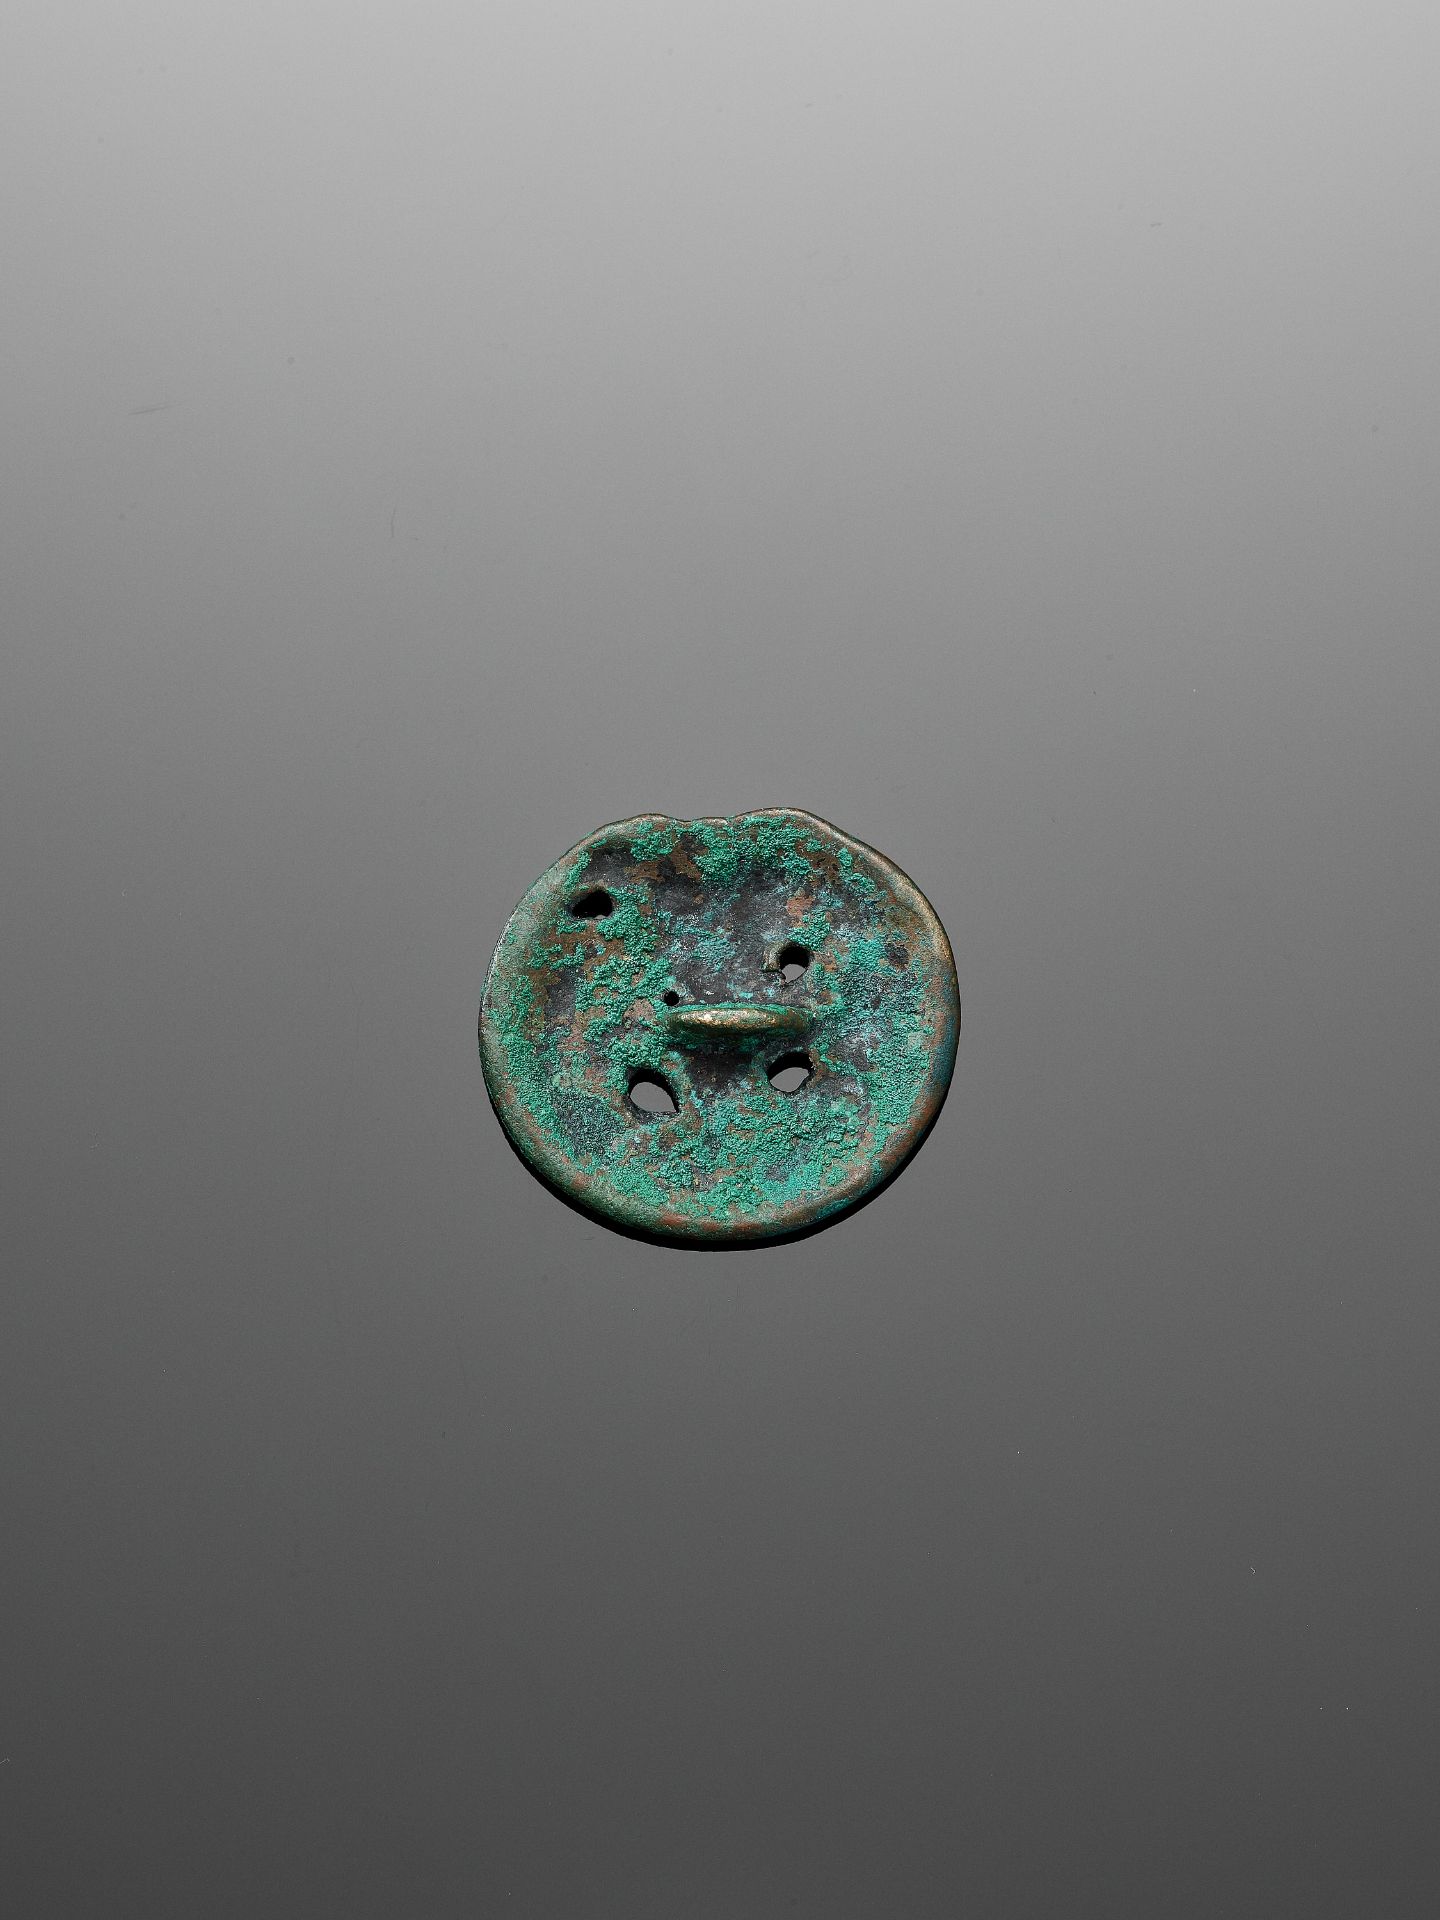 A SMALL ORDOS BRONZE PLAQUE, 7TH-6TH CENTURY BC - Image 7 of 7